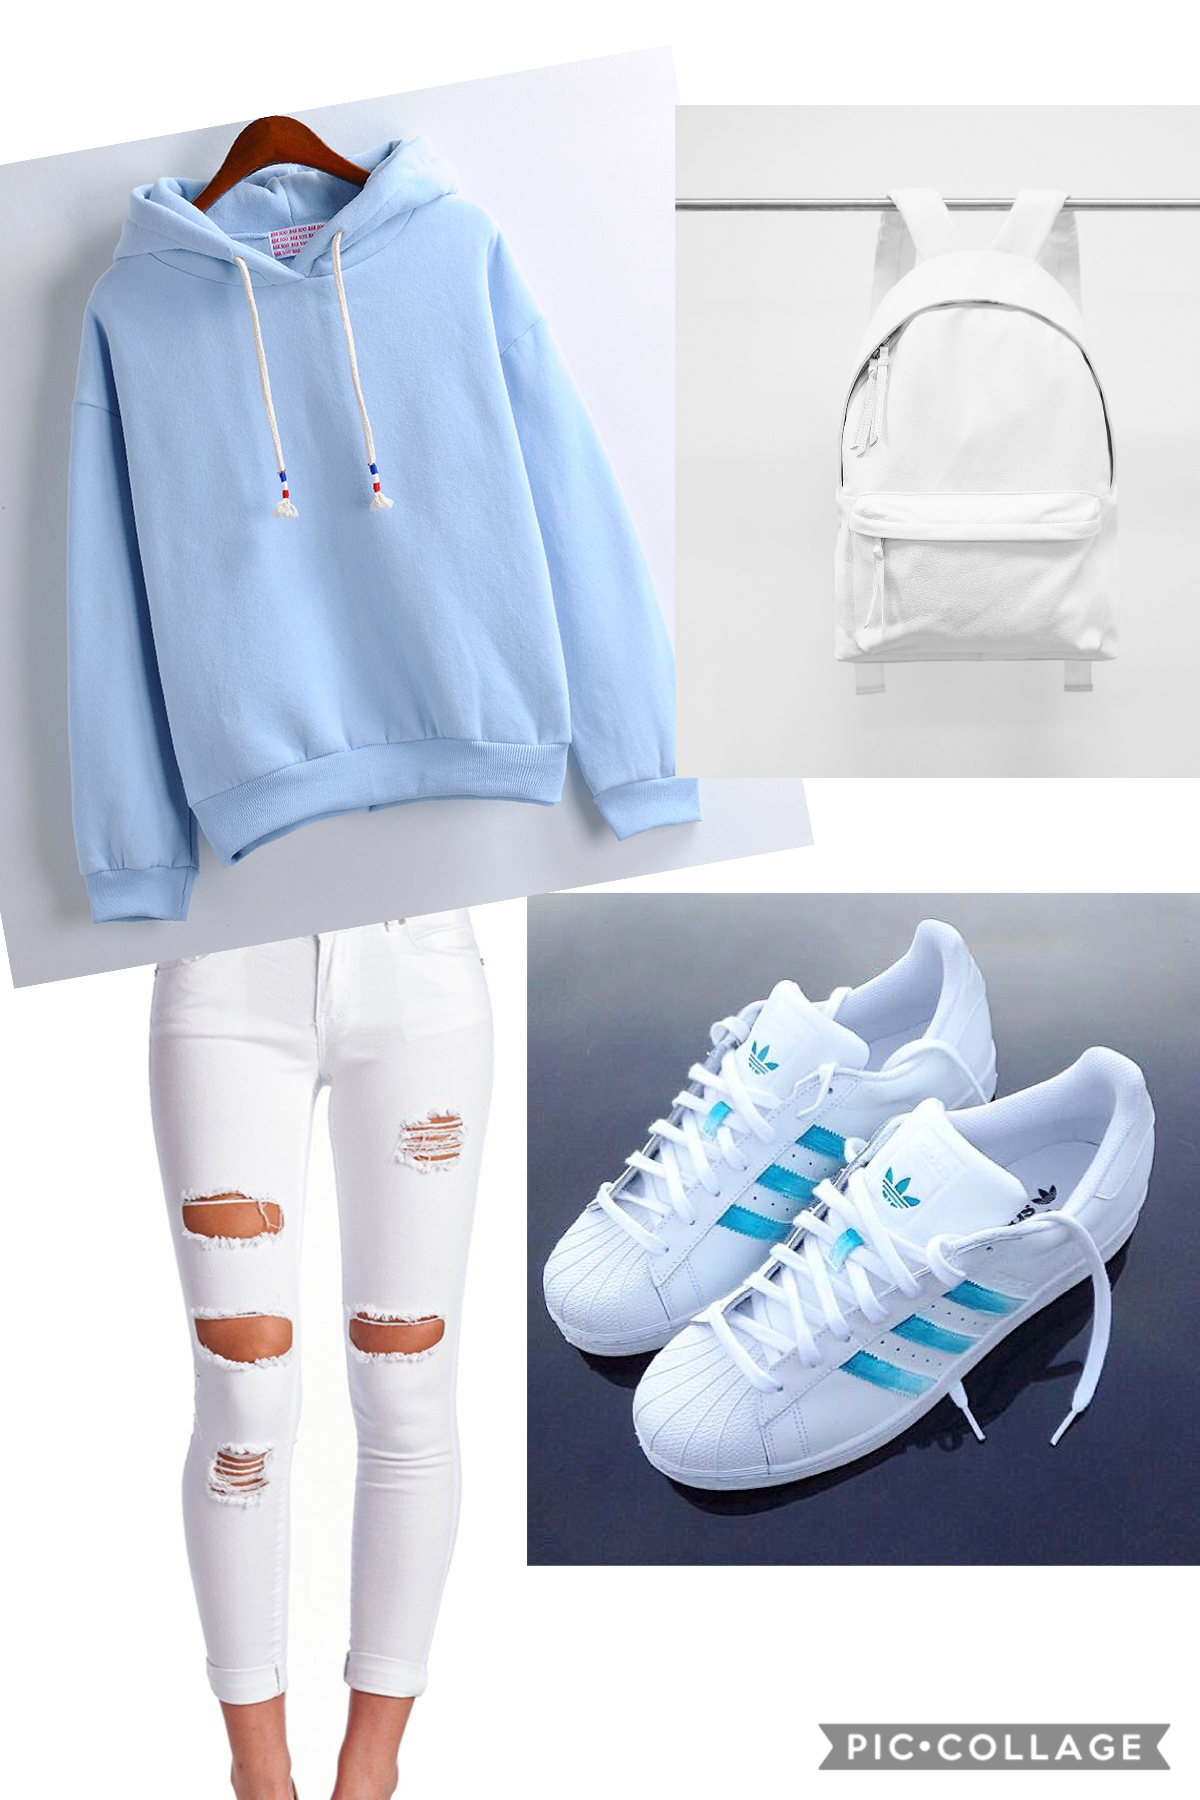 Super cute outfit idea 
Very pastel coloured 